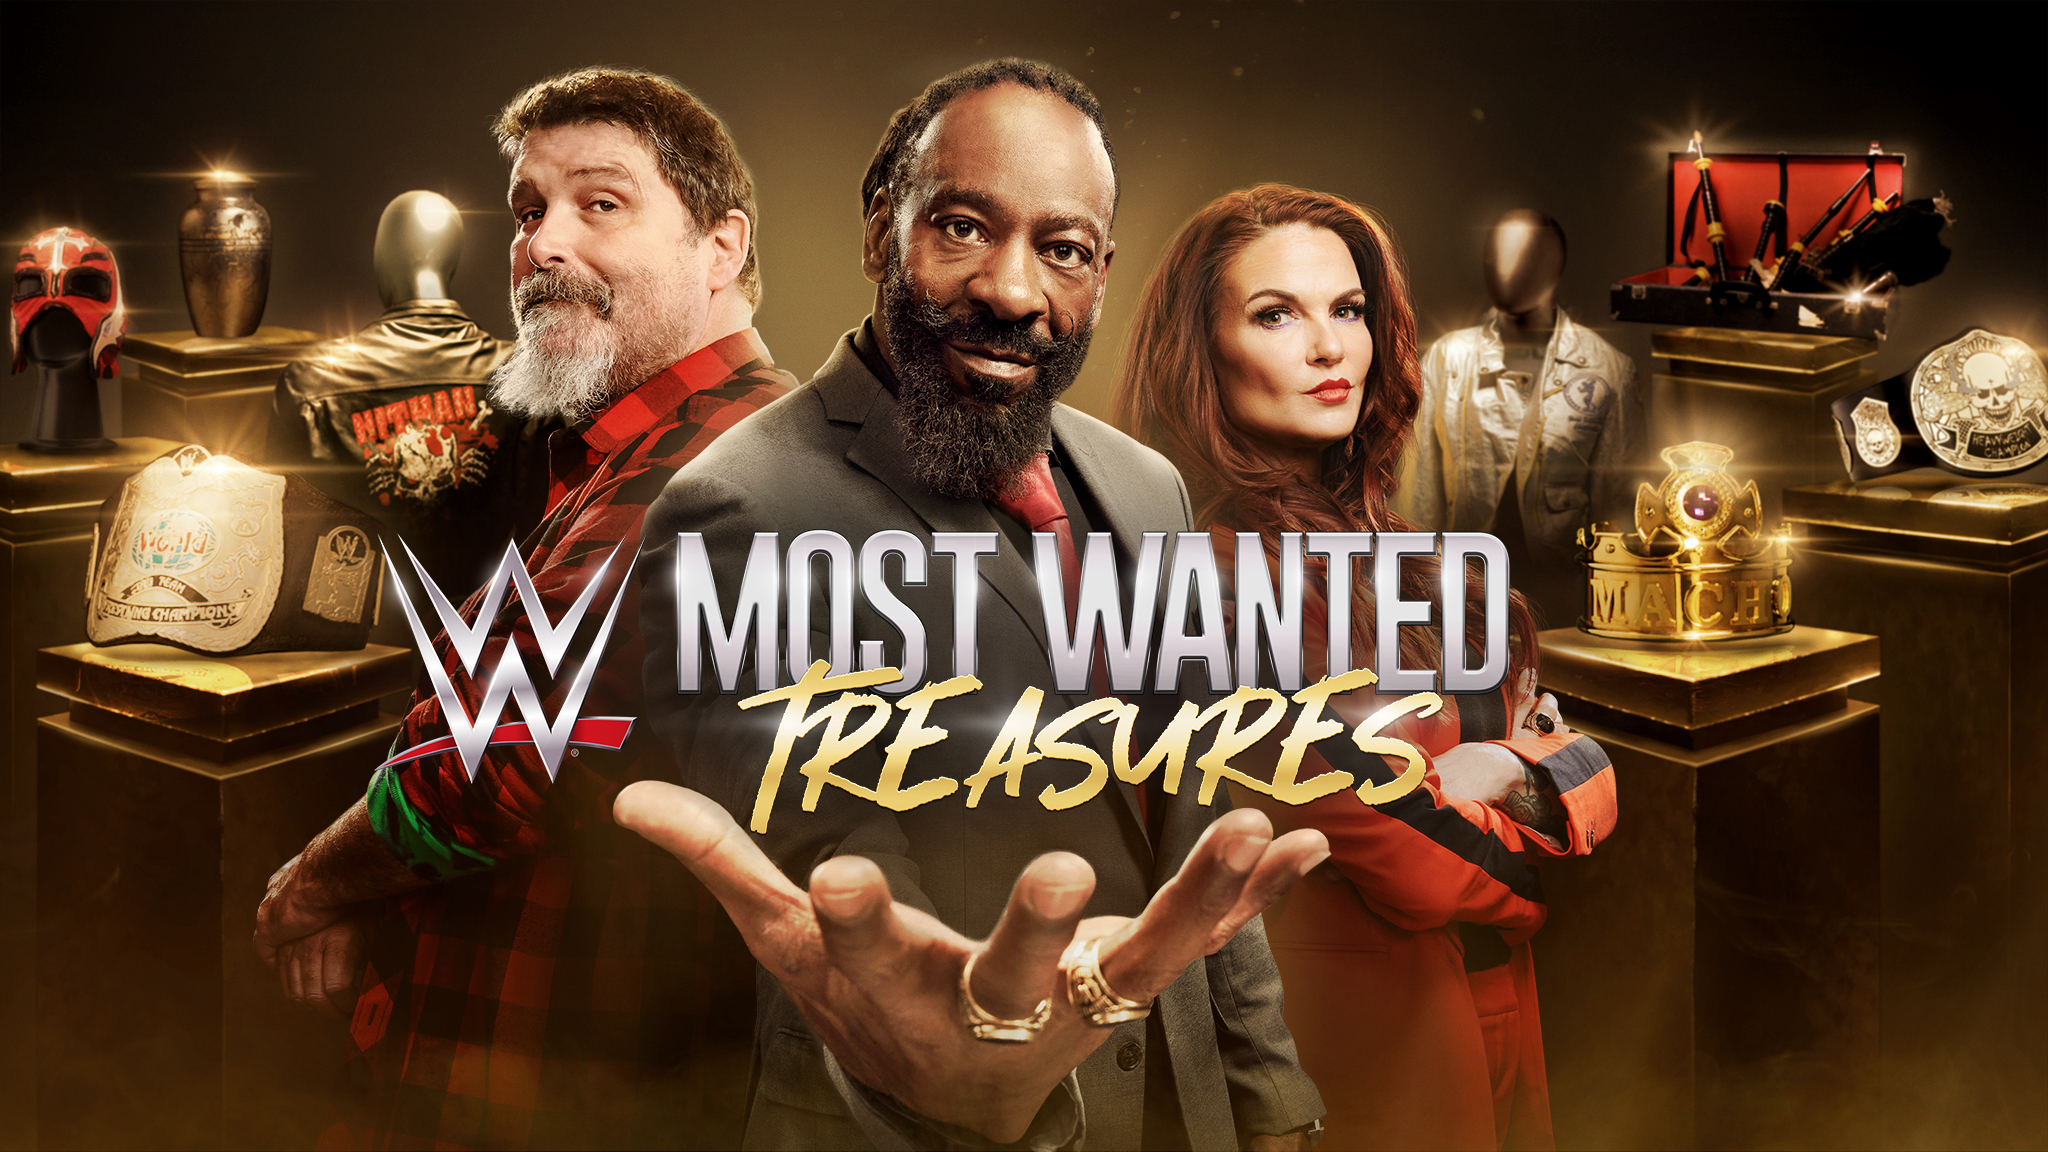 Viewership For The Latest Episodes Of WWE's Most Wanted Treasures And Stone Cold Takes On America